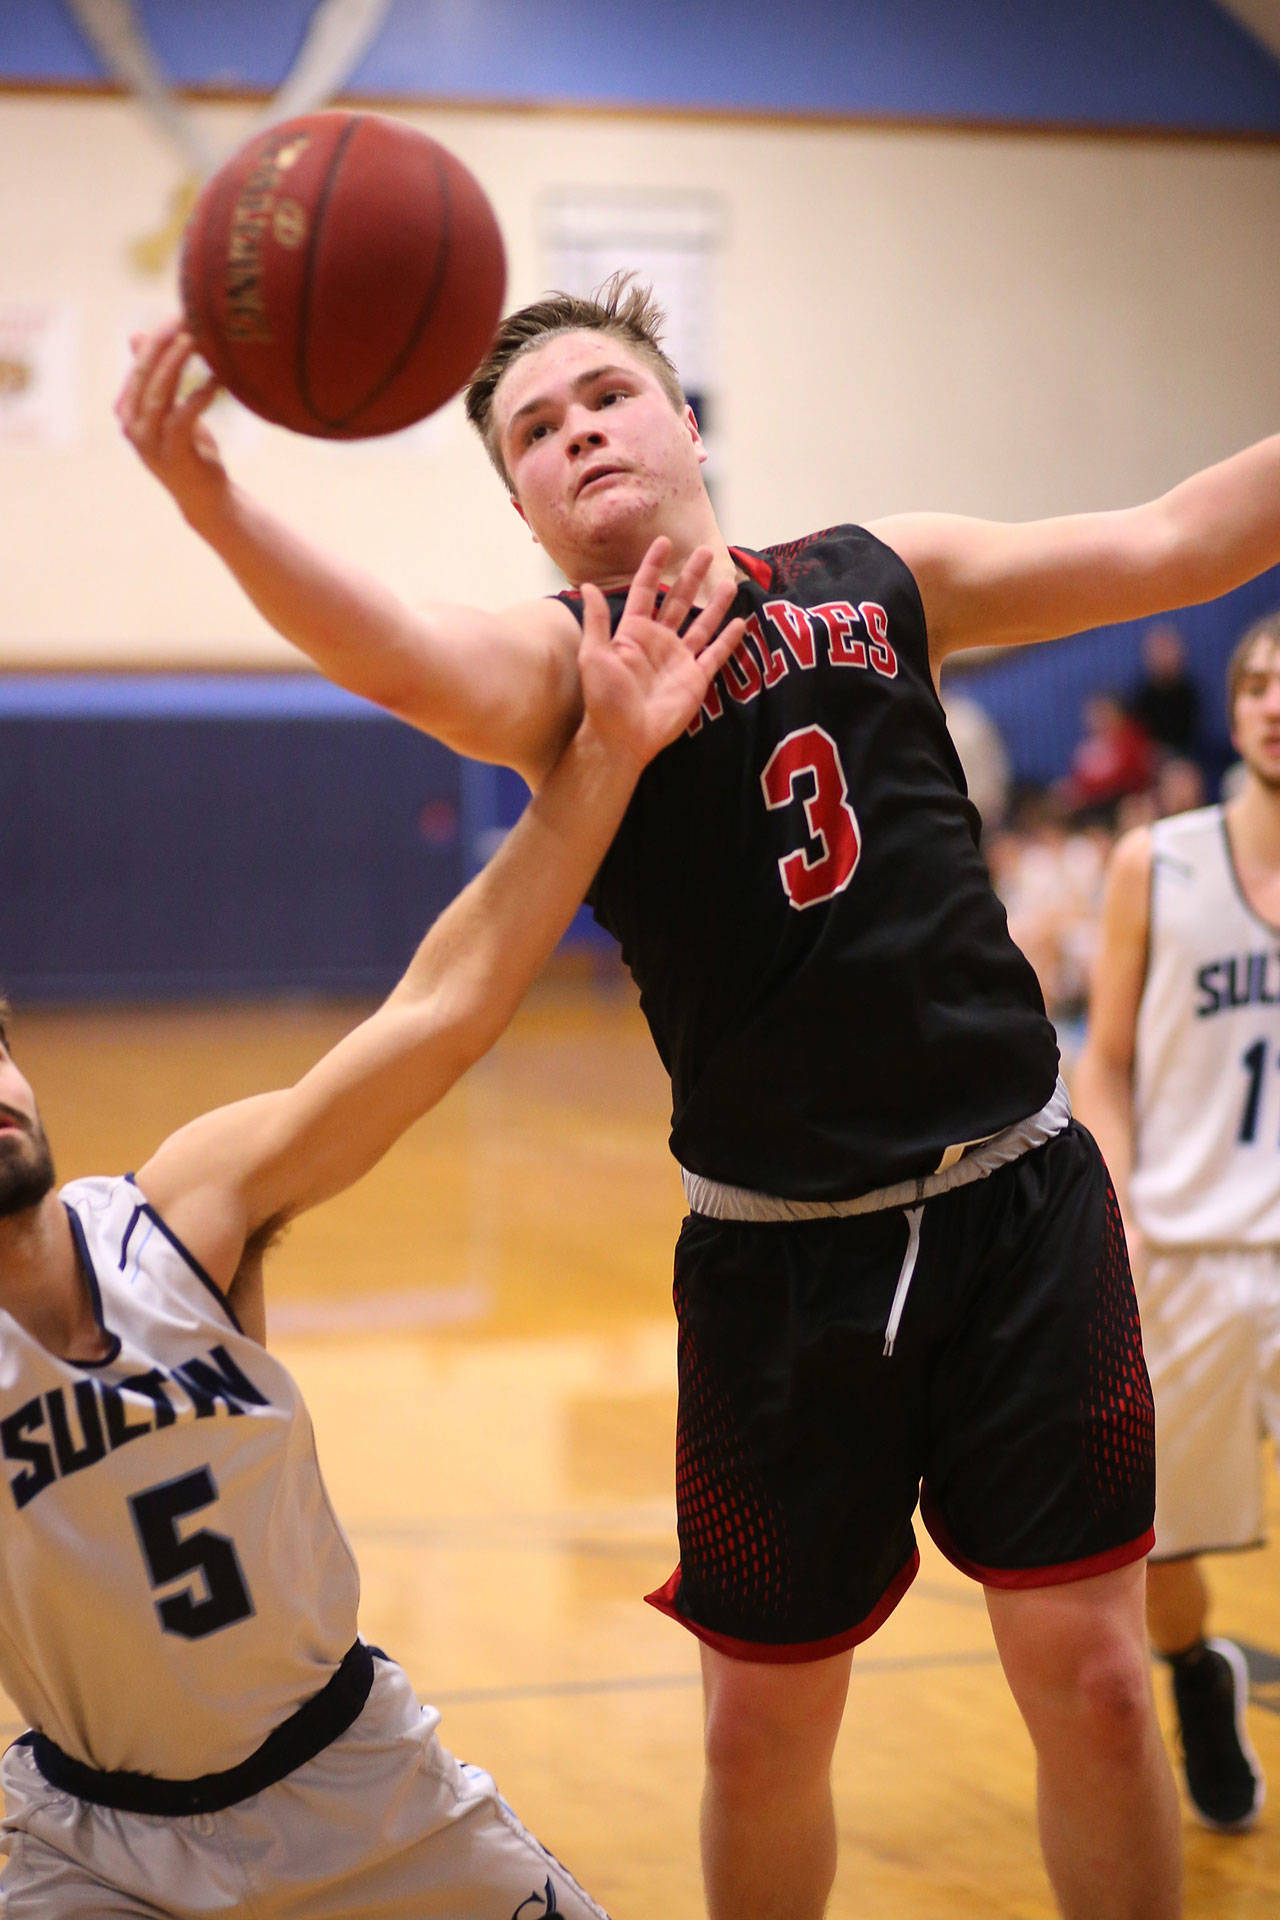 Coupeville’s Hunter Downes grabs a rebound at Sultan Saturday. (Photo by John Fisken)